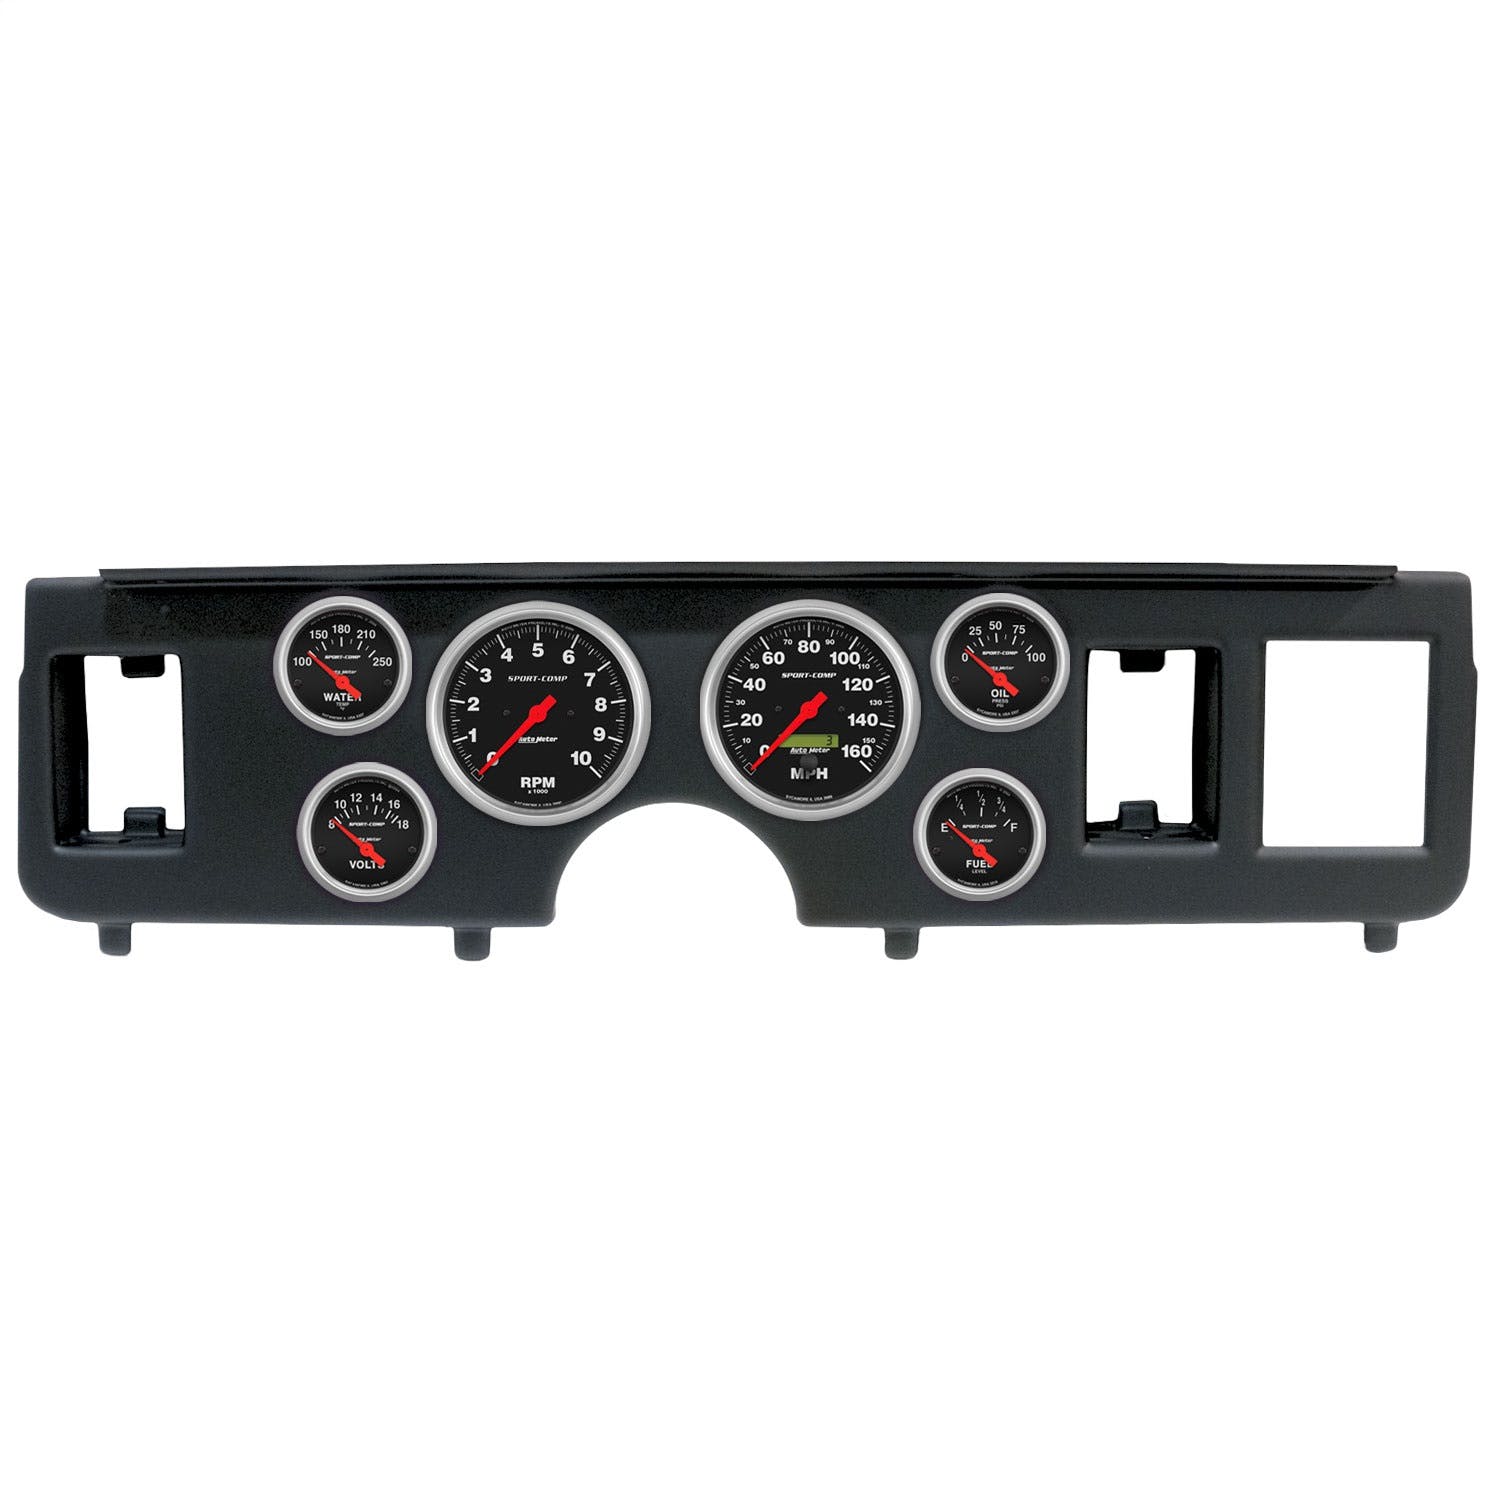 AutoMeter Products 2917-11 6 Gauge Direct-Fit Dash Kit, Ford Mustang 79-86, Sport-Comp